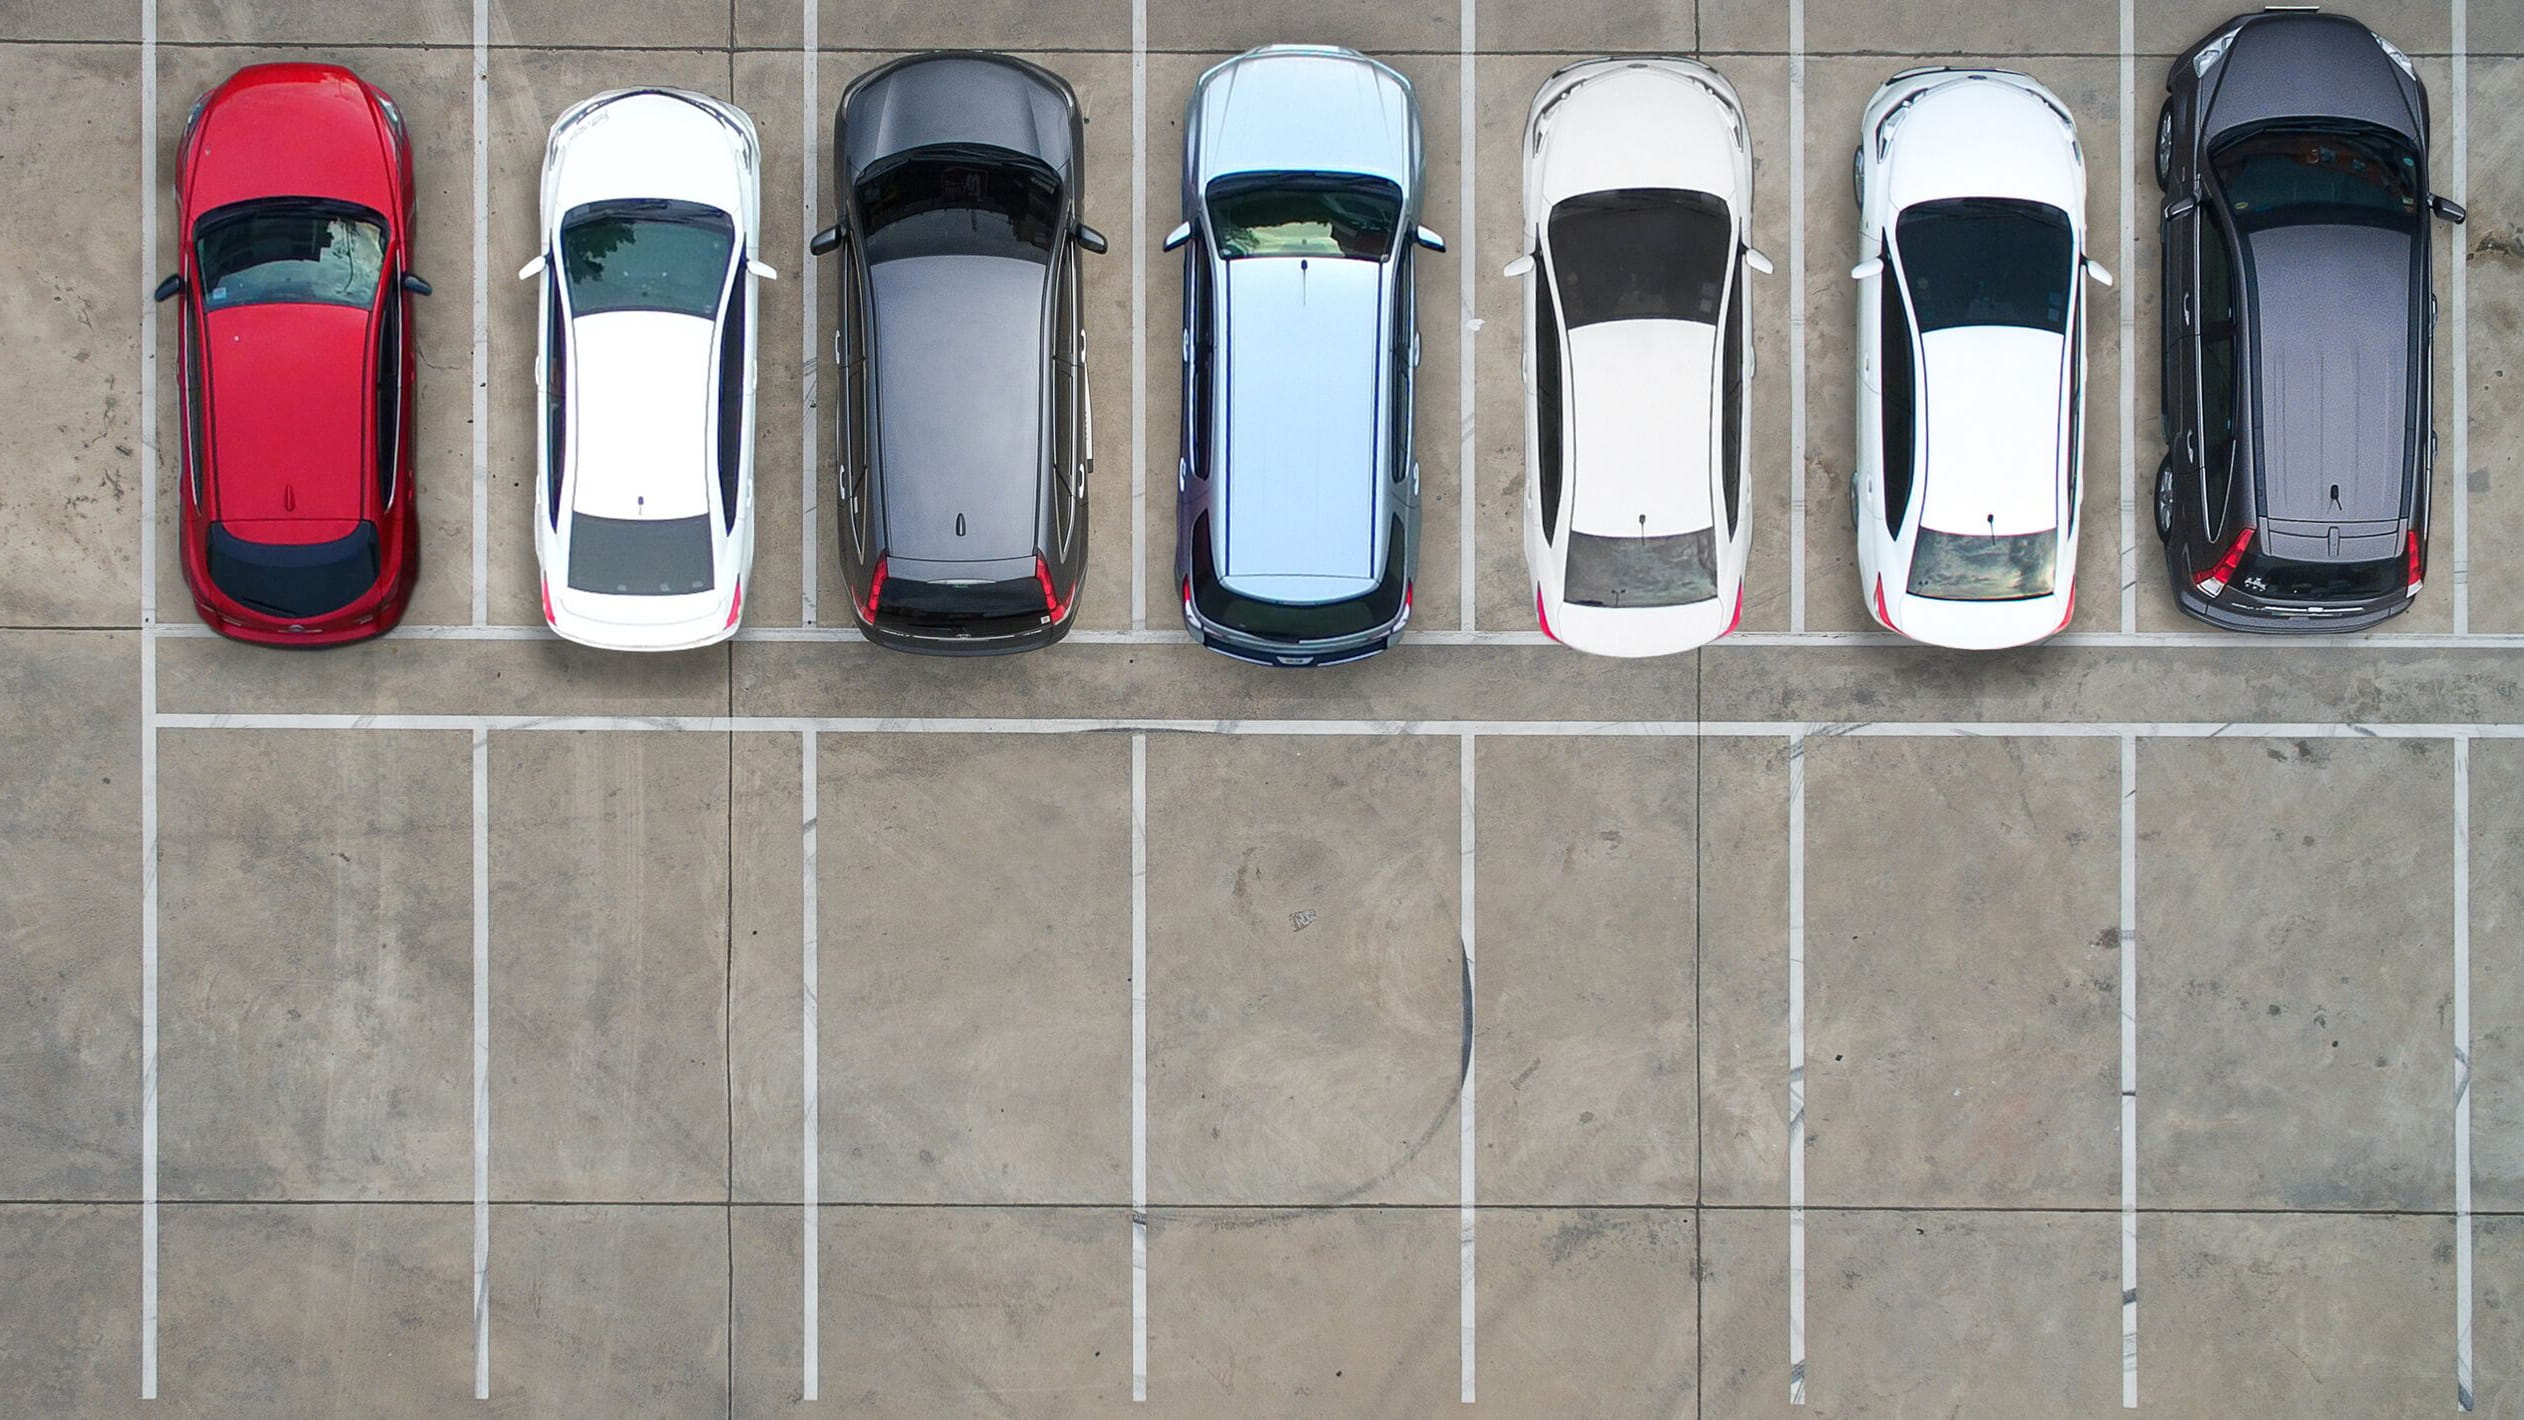 Car in row shot from above